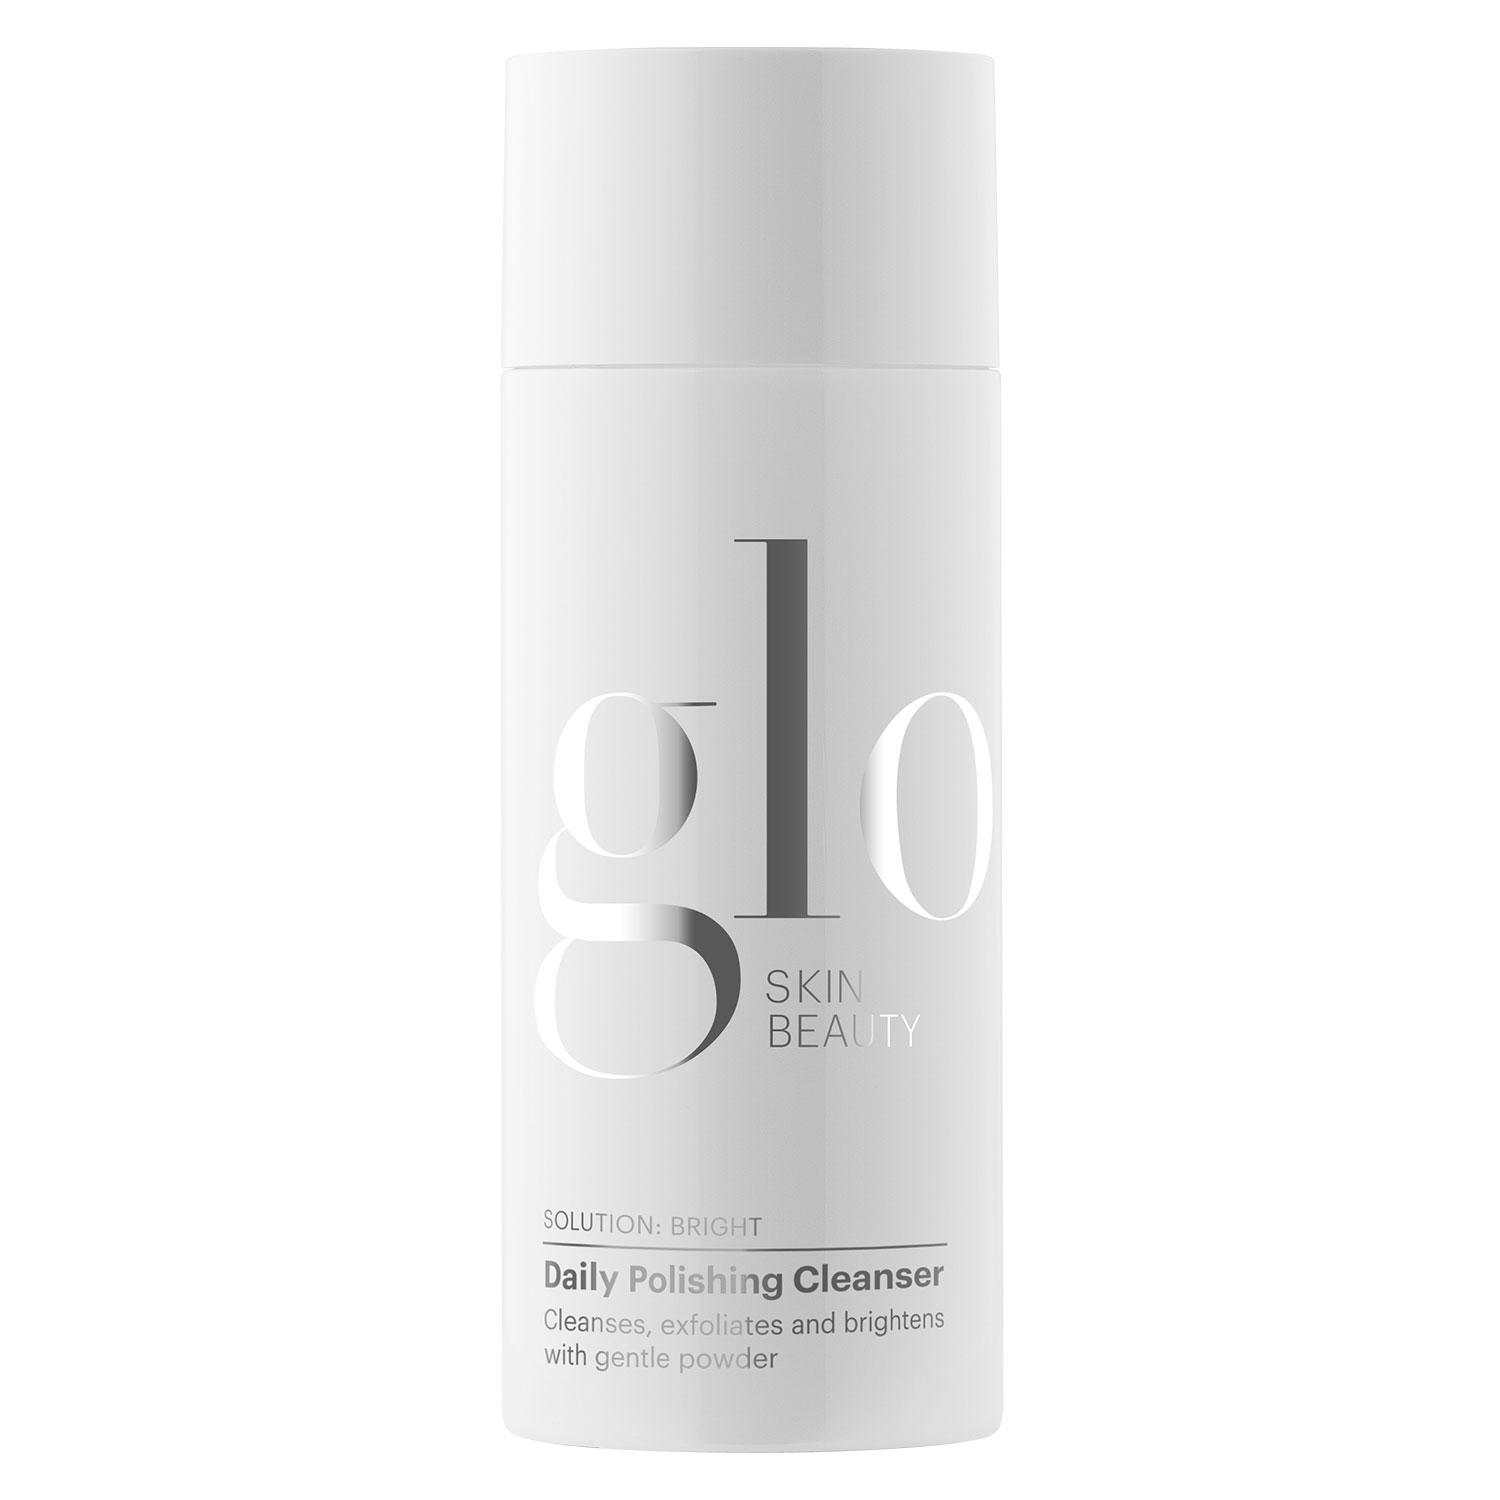 Glo Skin Beauty Care - Daily Polishing Cleanser